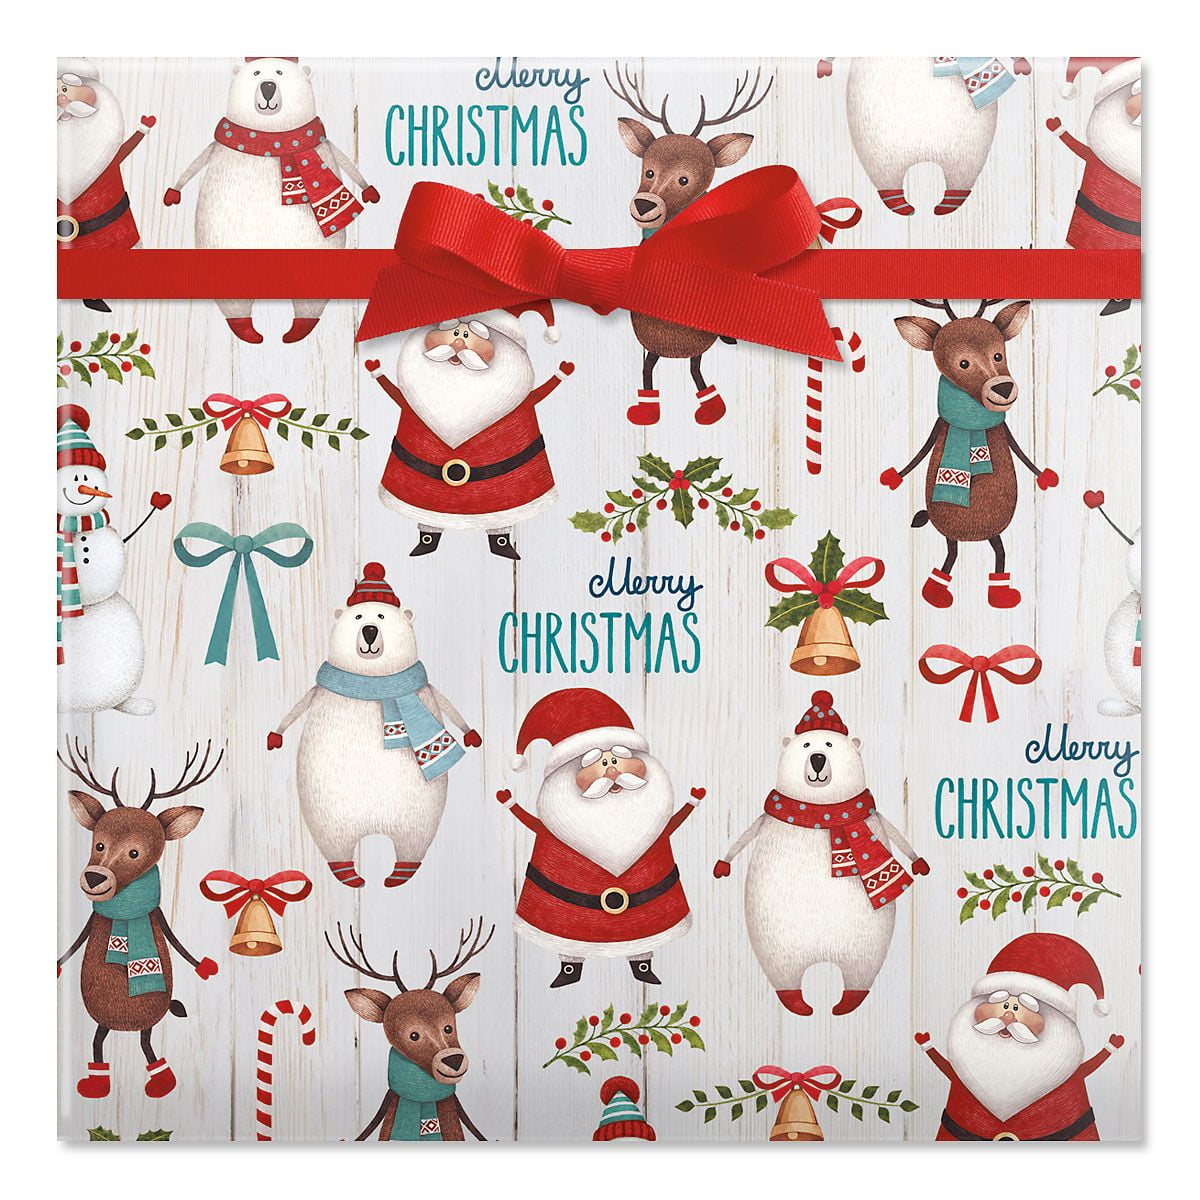 Christmas wrap paper design with trees and Santa Claus. Xmas gift wrapping  background with snow and gifts., Stock vector